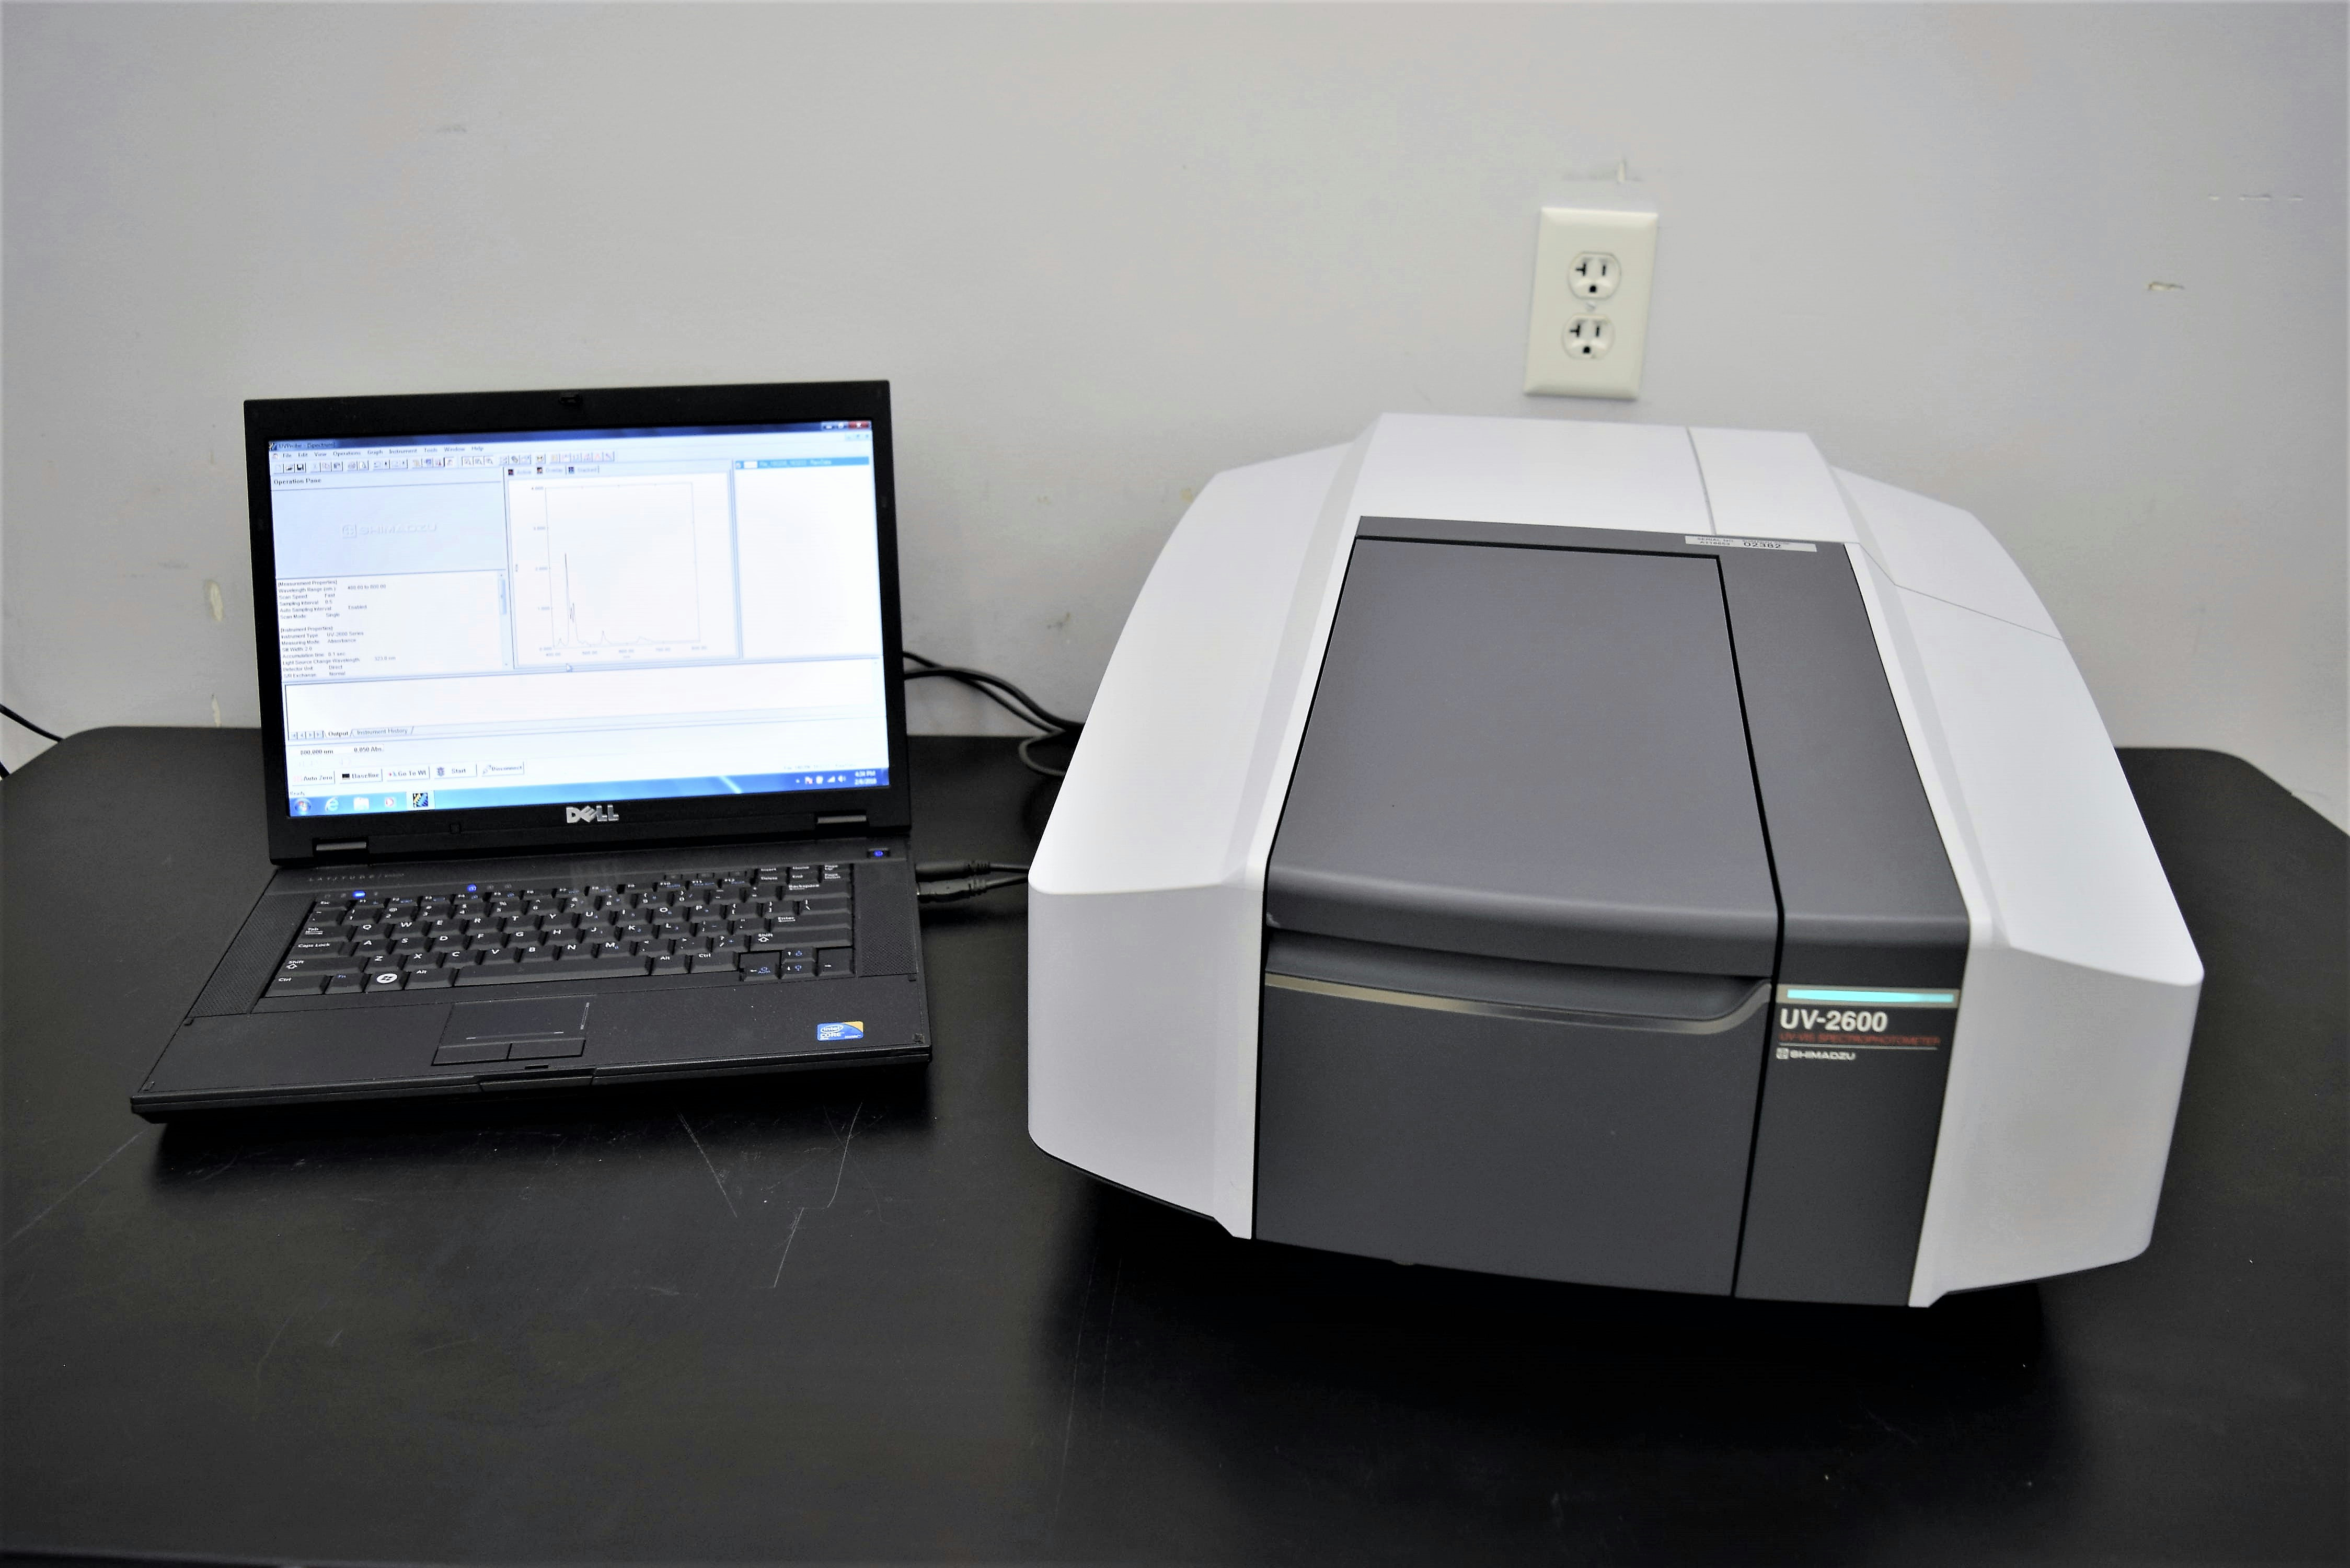 Used Shimadzu UV-2600 for sale by New Life Scientific Inc ...
